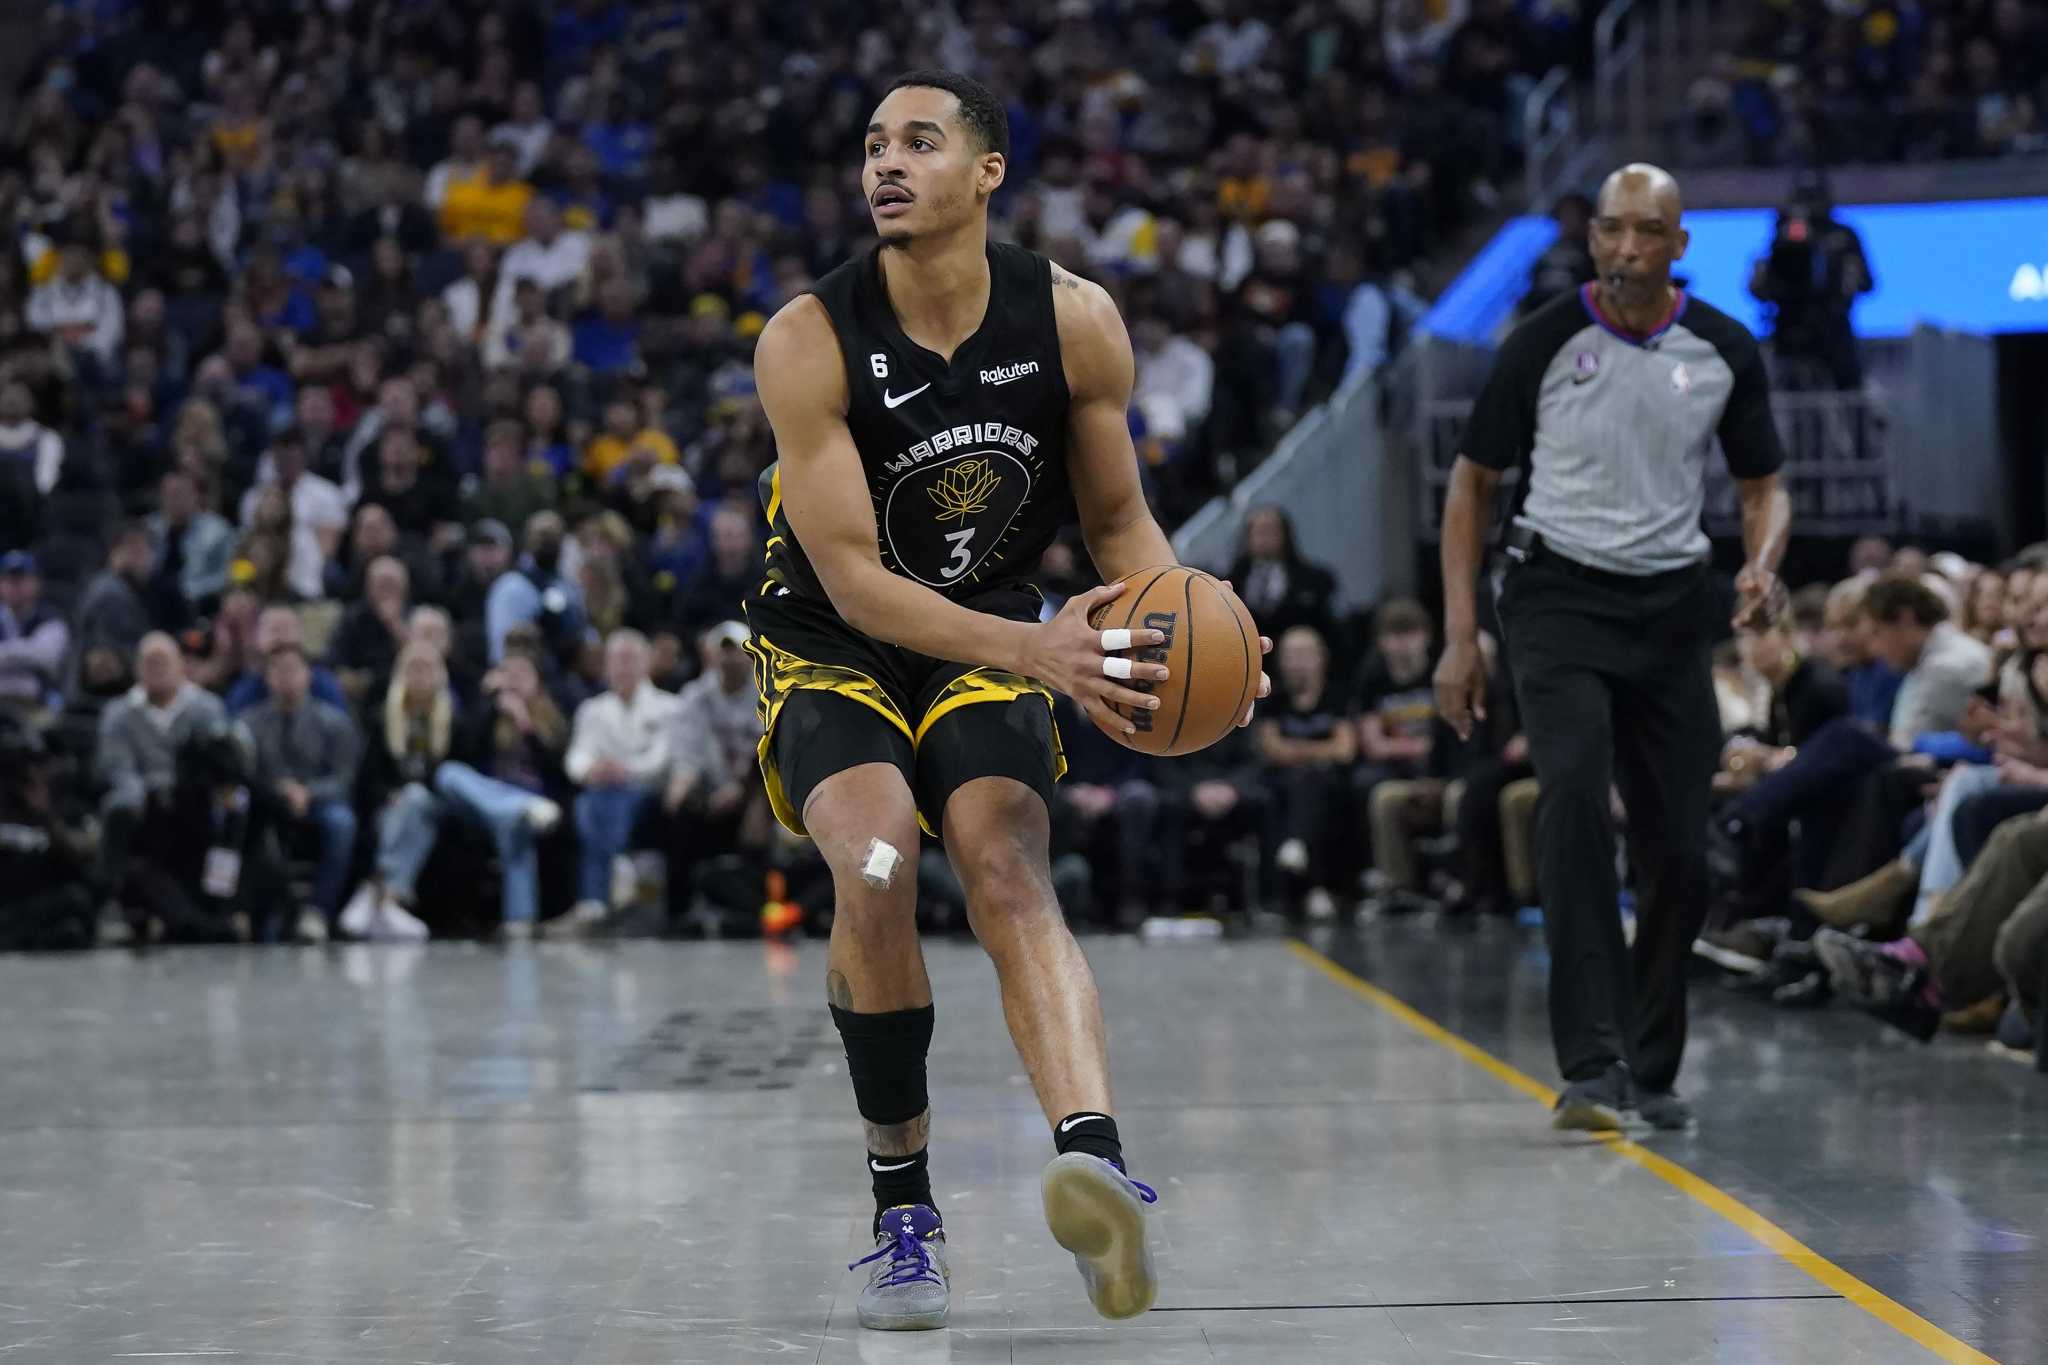 Jordan Poole improving with Warriors’ second unit, but will his